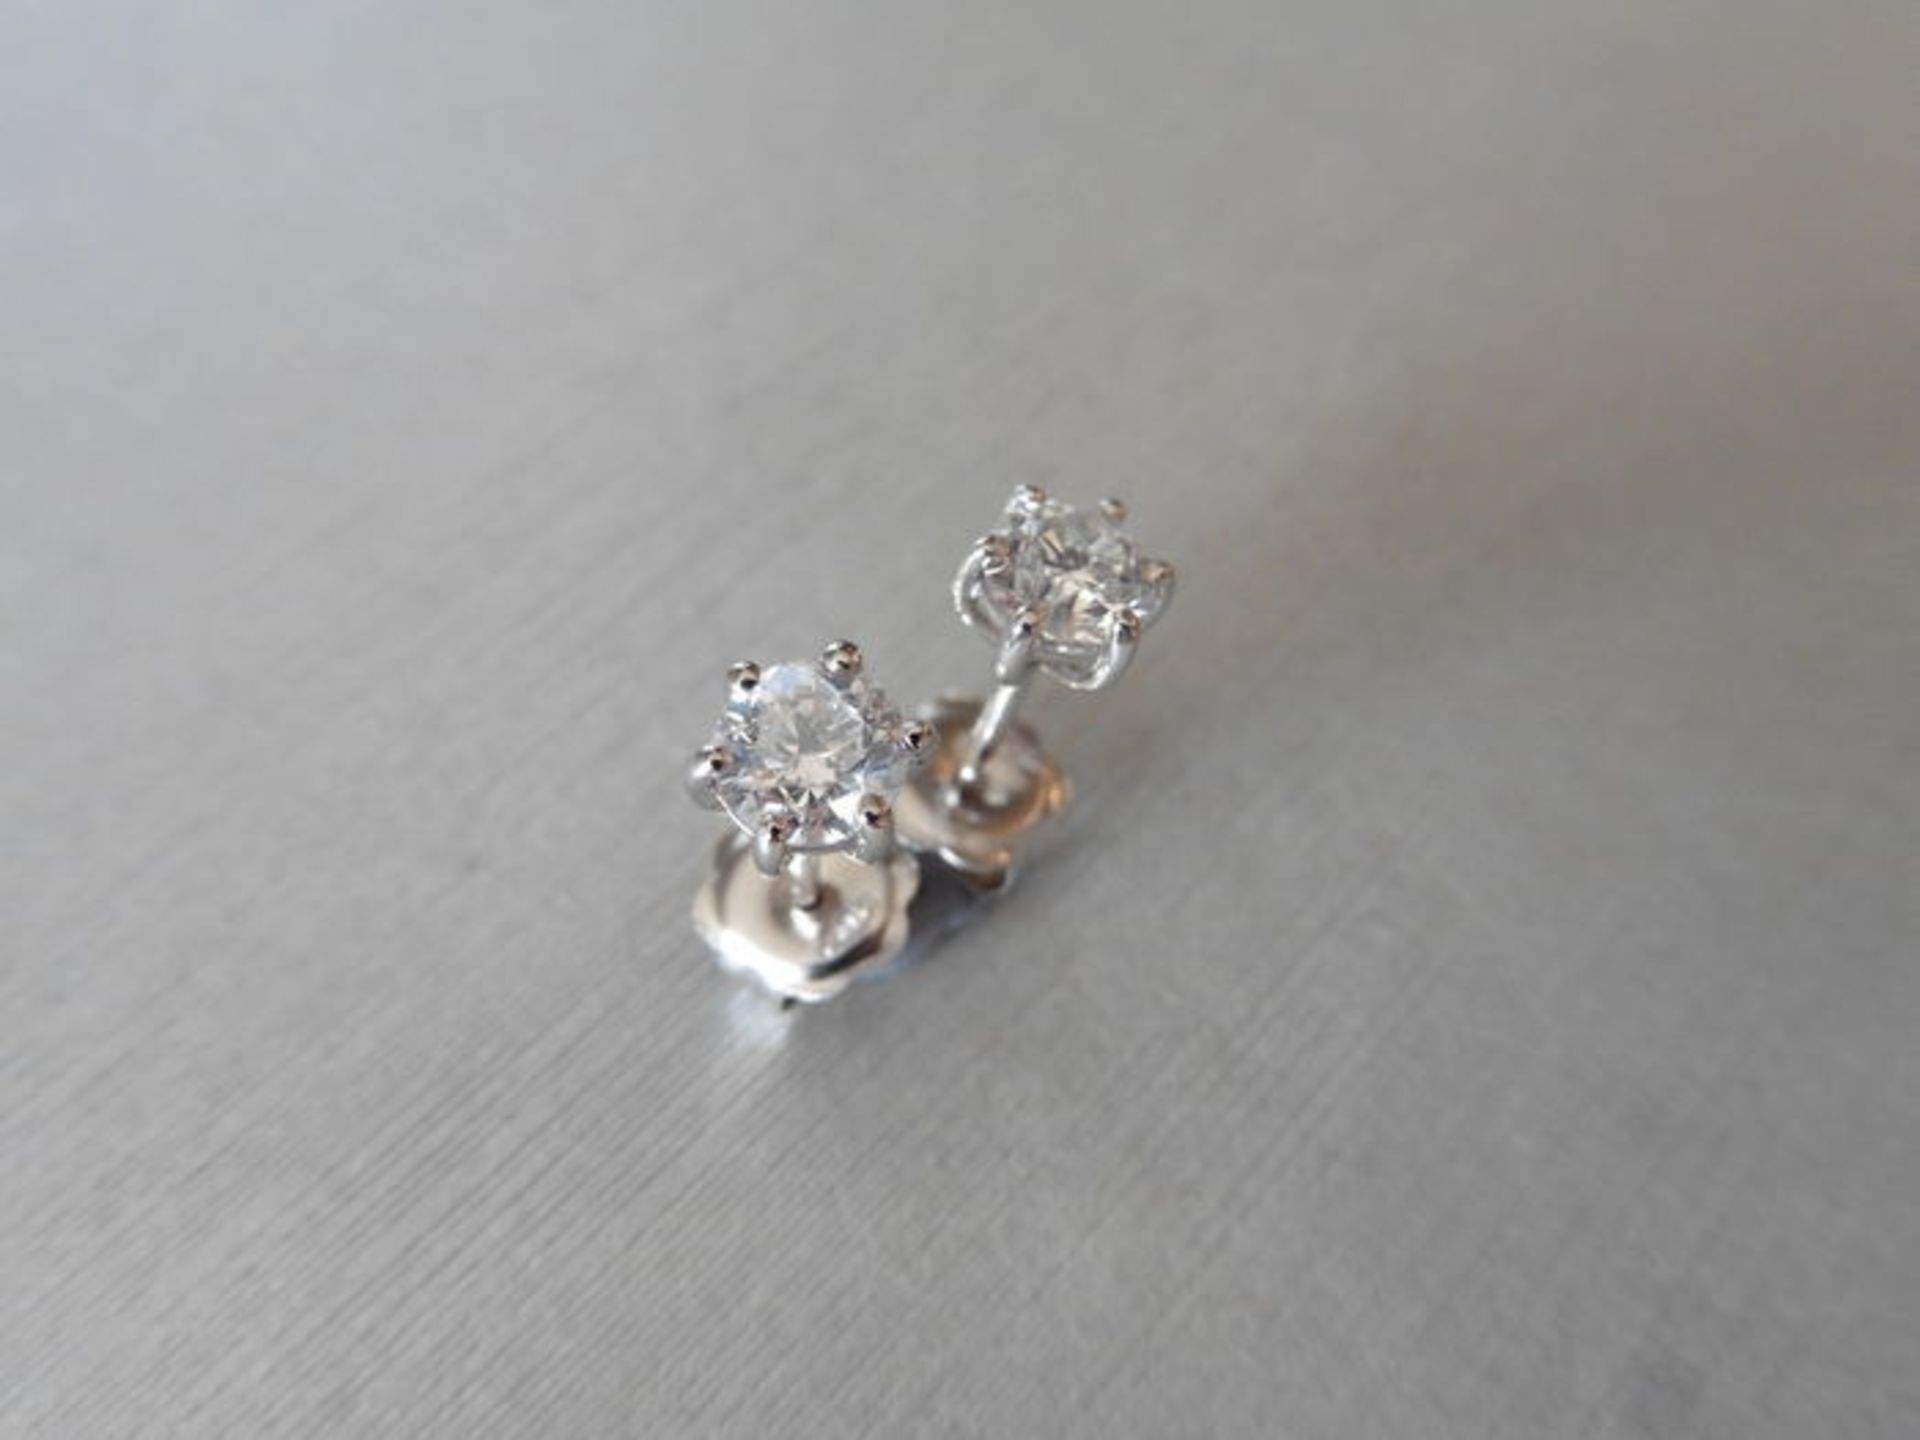 0.80ct Diamond solitaire earrings set with brilliant cut diamonds, I colour SI2 clarity. Six claw